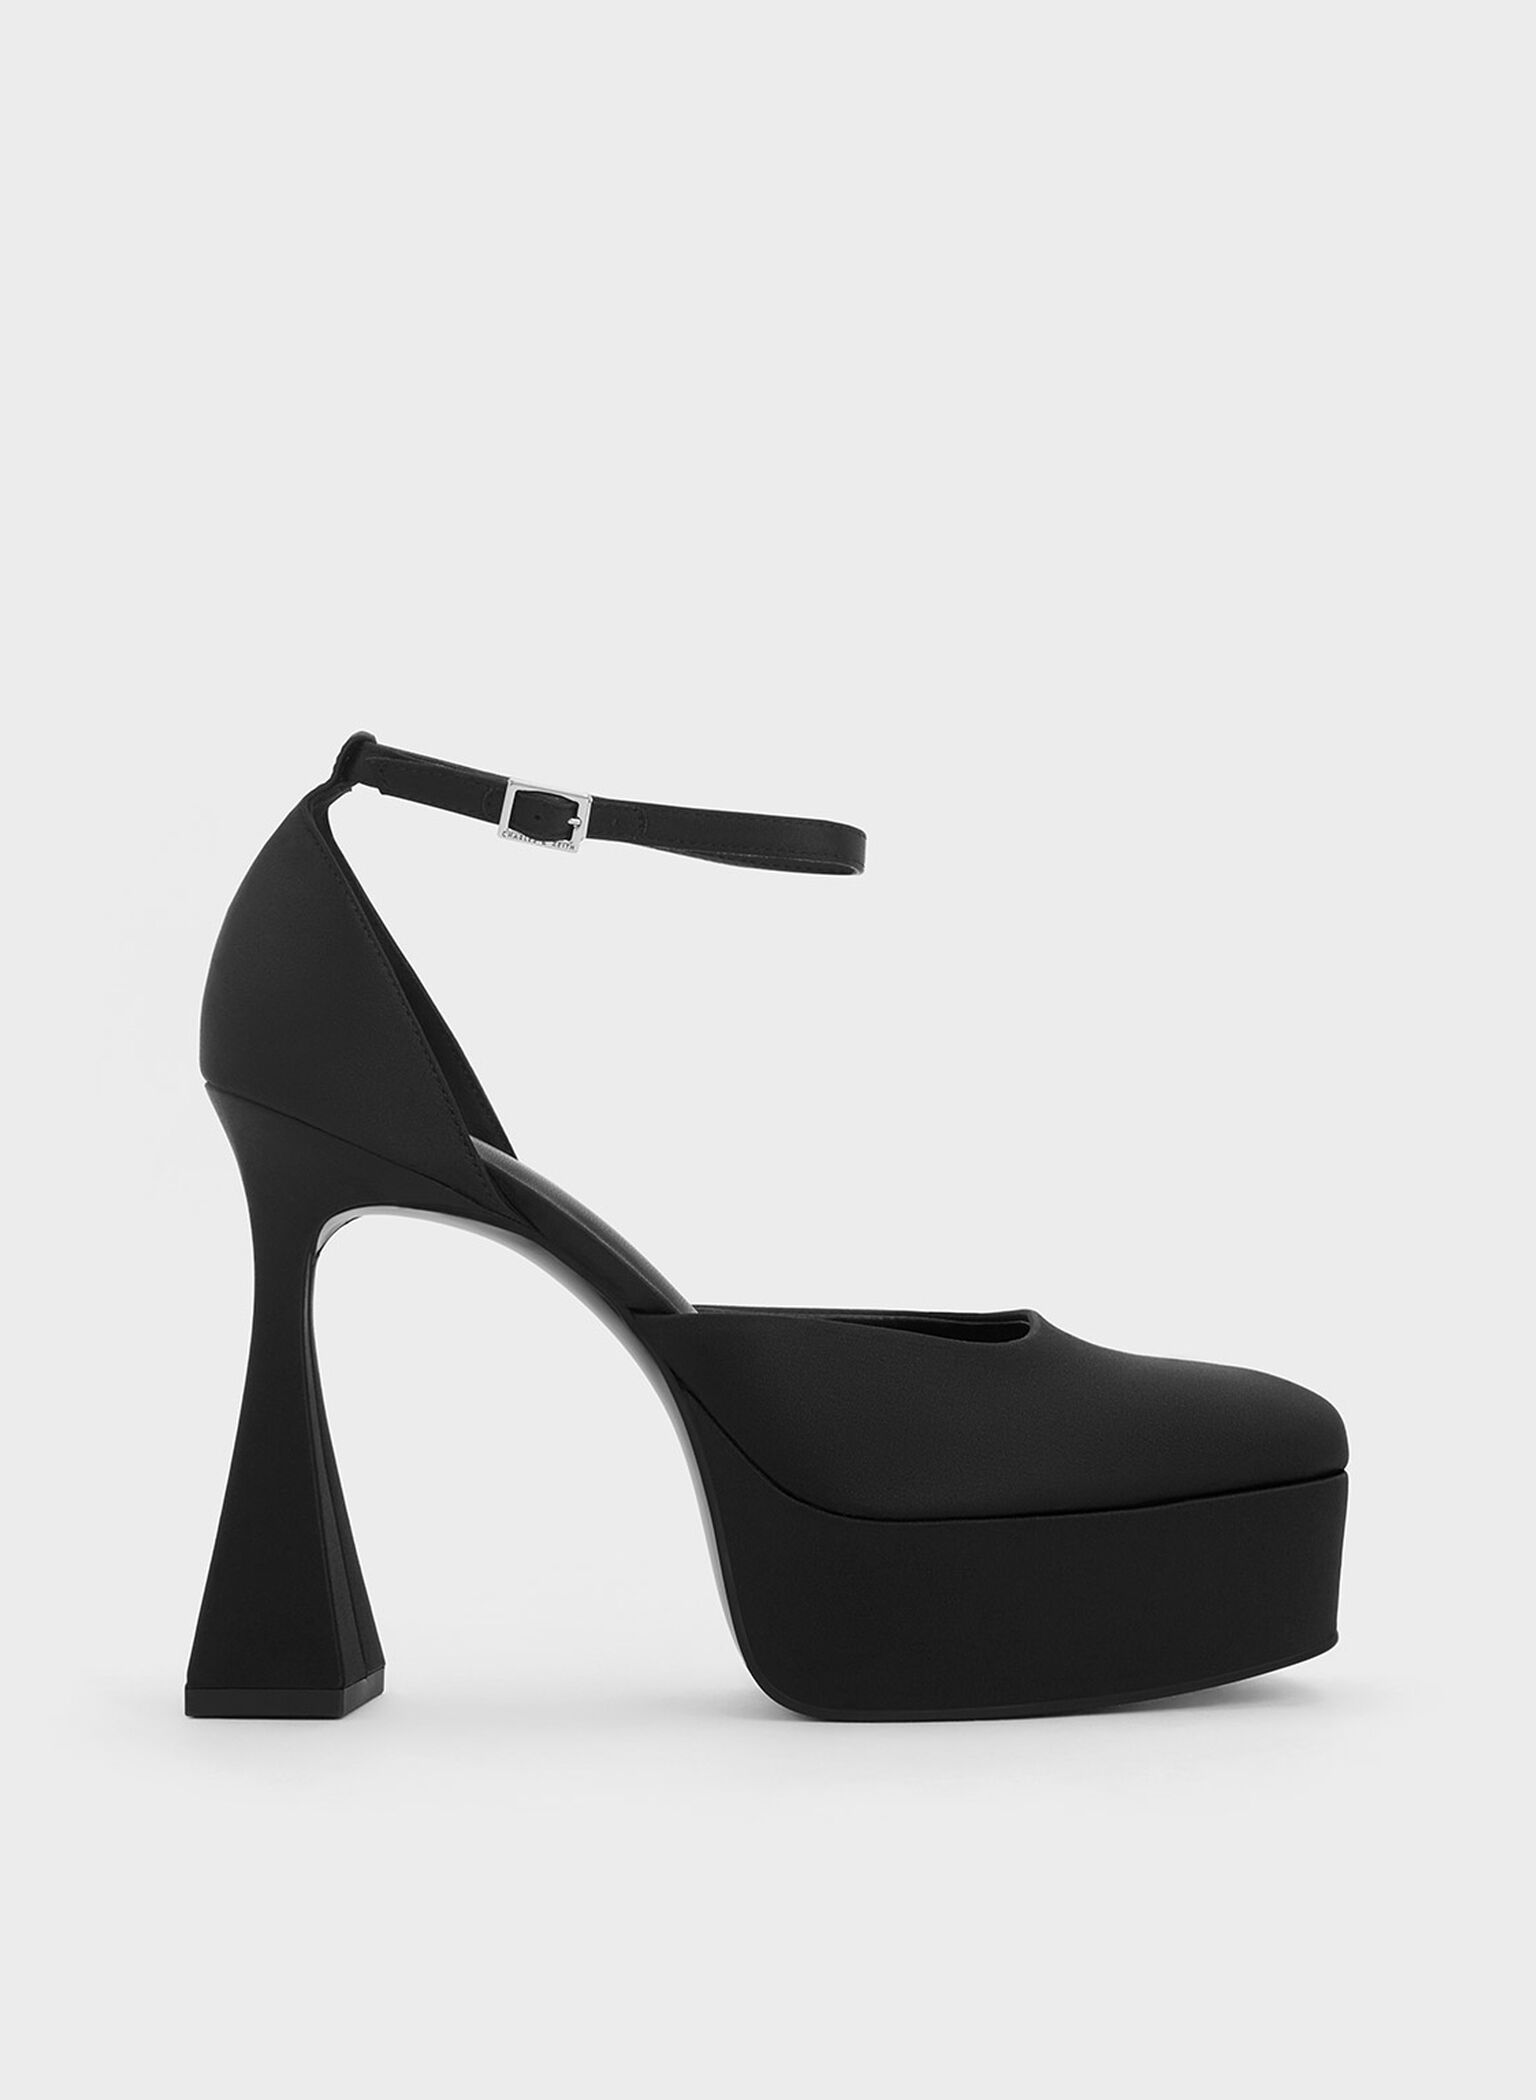 Recycled Polyester Flare Heel D'Orsay Pumps, Black, hi-res